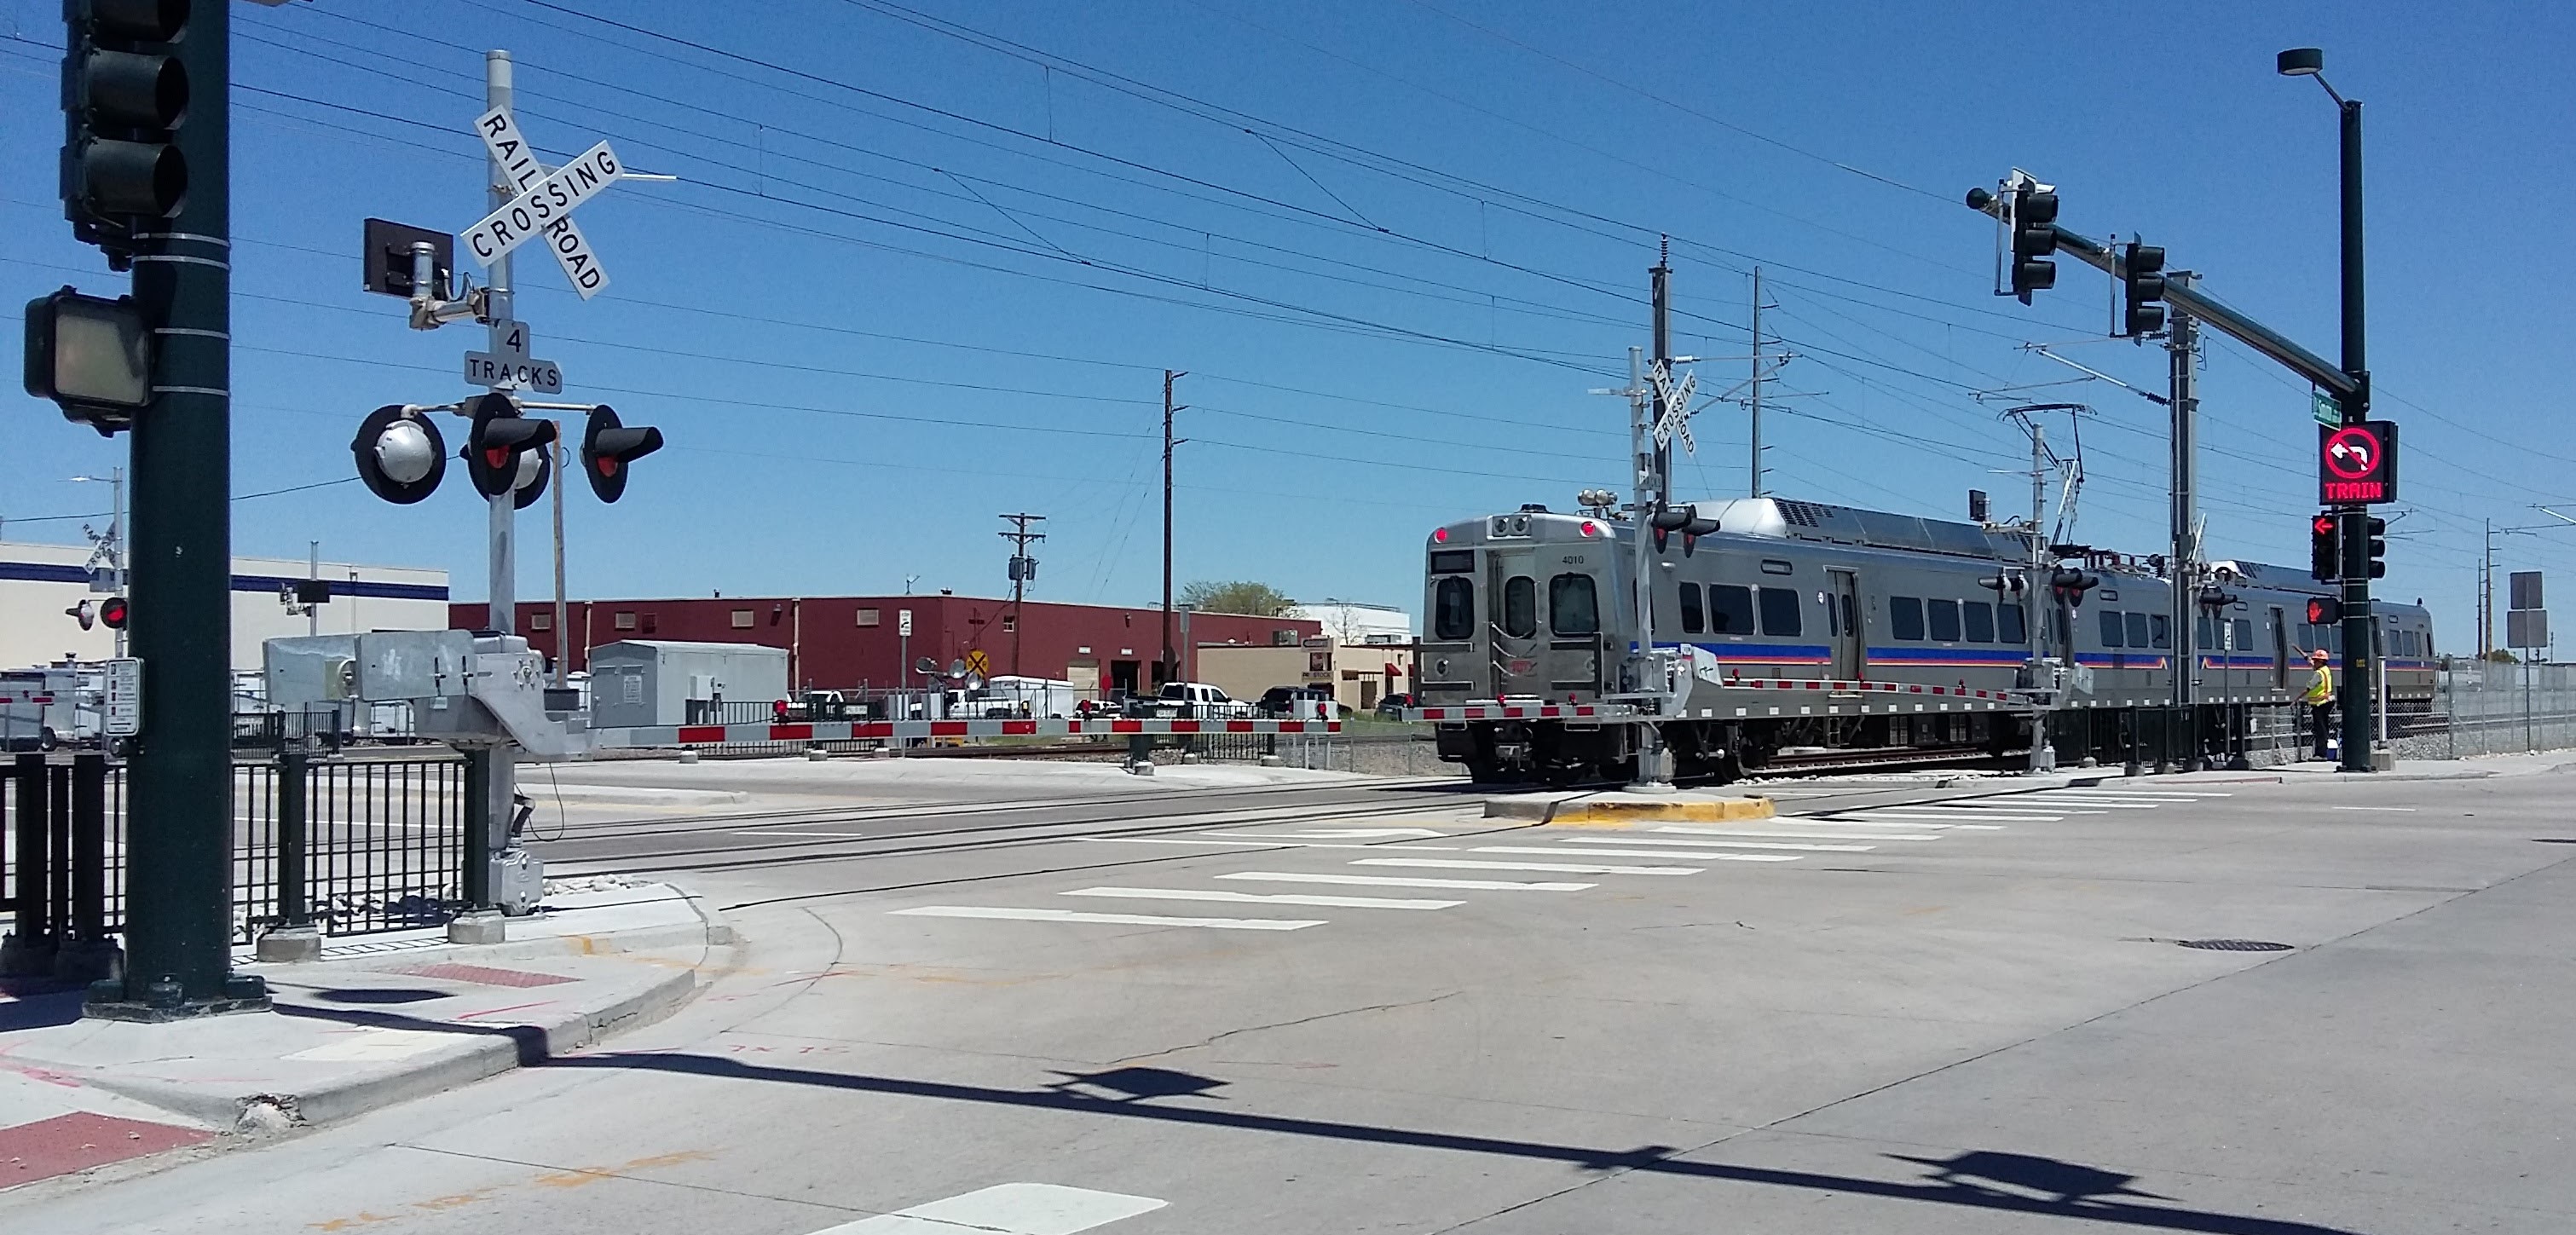 New Denver RTD electric-catenary heavy rail crossing at grade. Photo from Wikimedia Commons